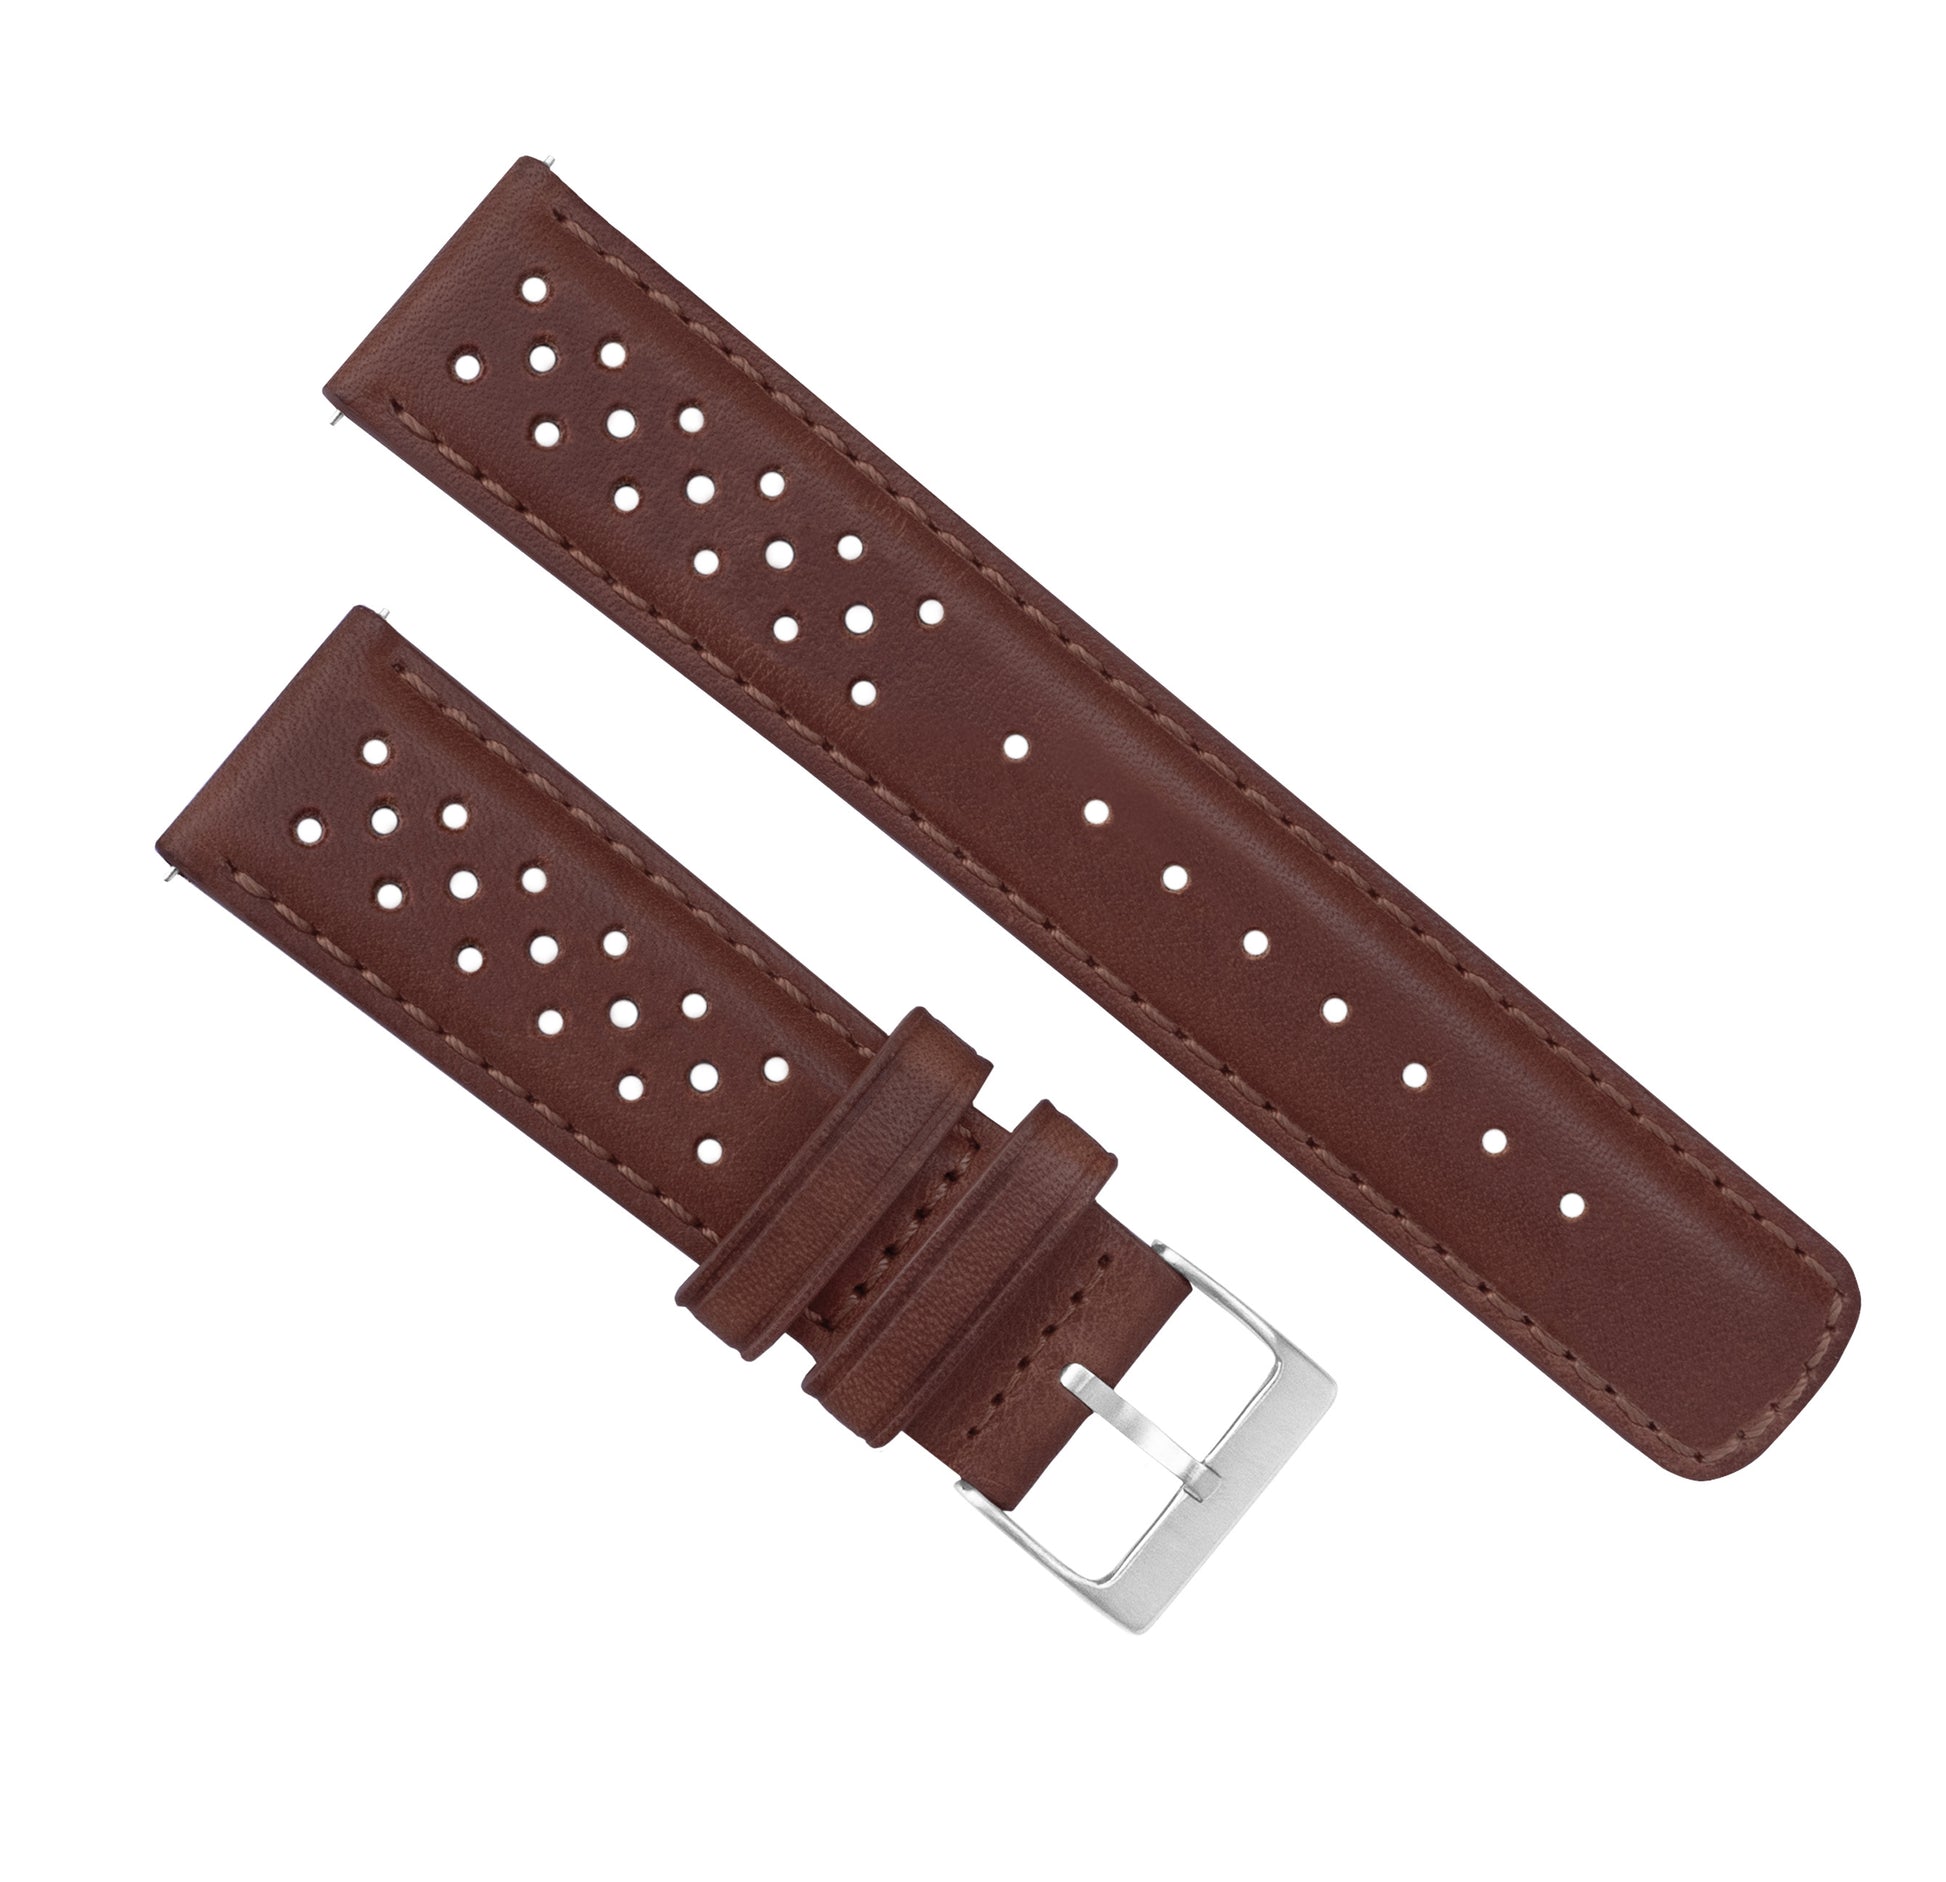 Samsung Galaxy Watch Active 2 | Racing Horween Leather | Chocolate Brown - Barton Watch Bands